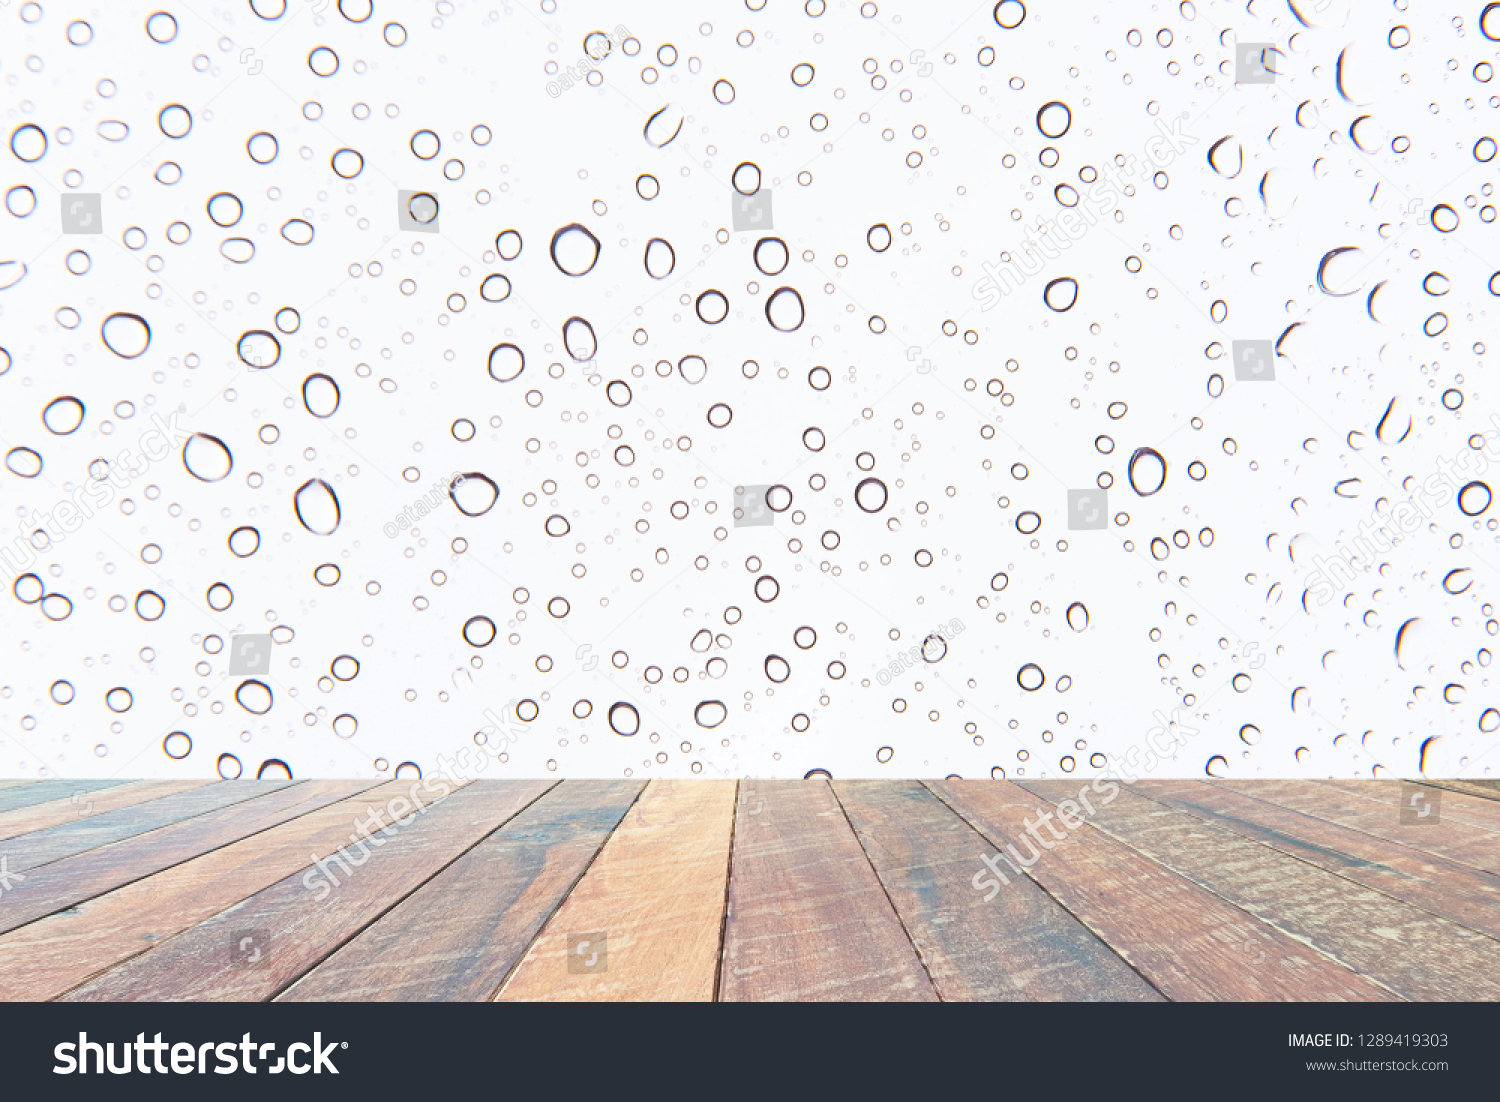 Water drops , Rain droplets on white background and empty wood desk .Blank space for text and images. #1289419303